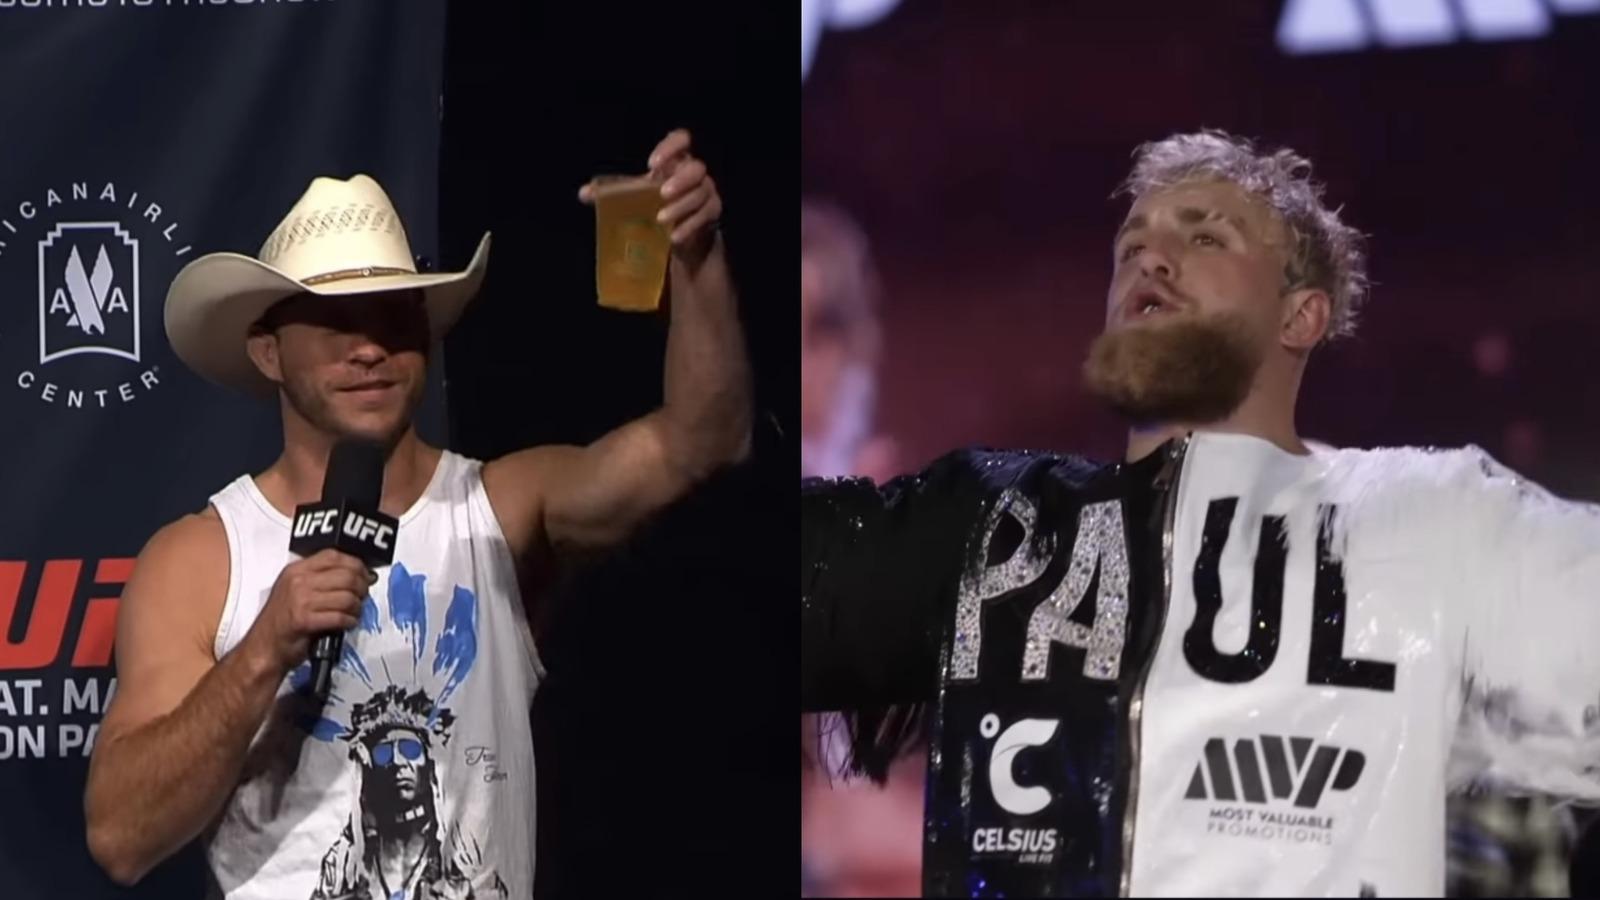 Jake Paul comes to the defense of Donald Cerrone after the MMA legend revealed his payout for UFC 246